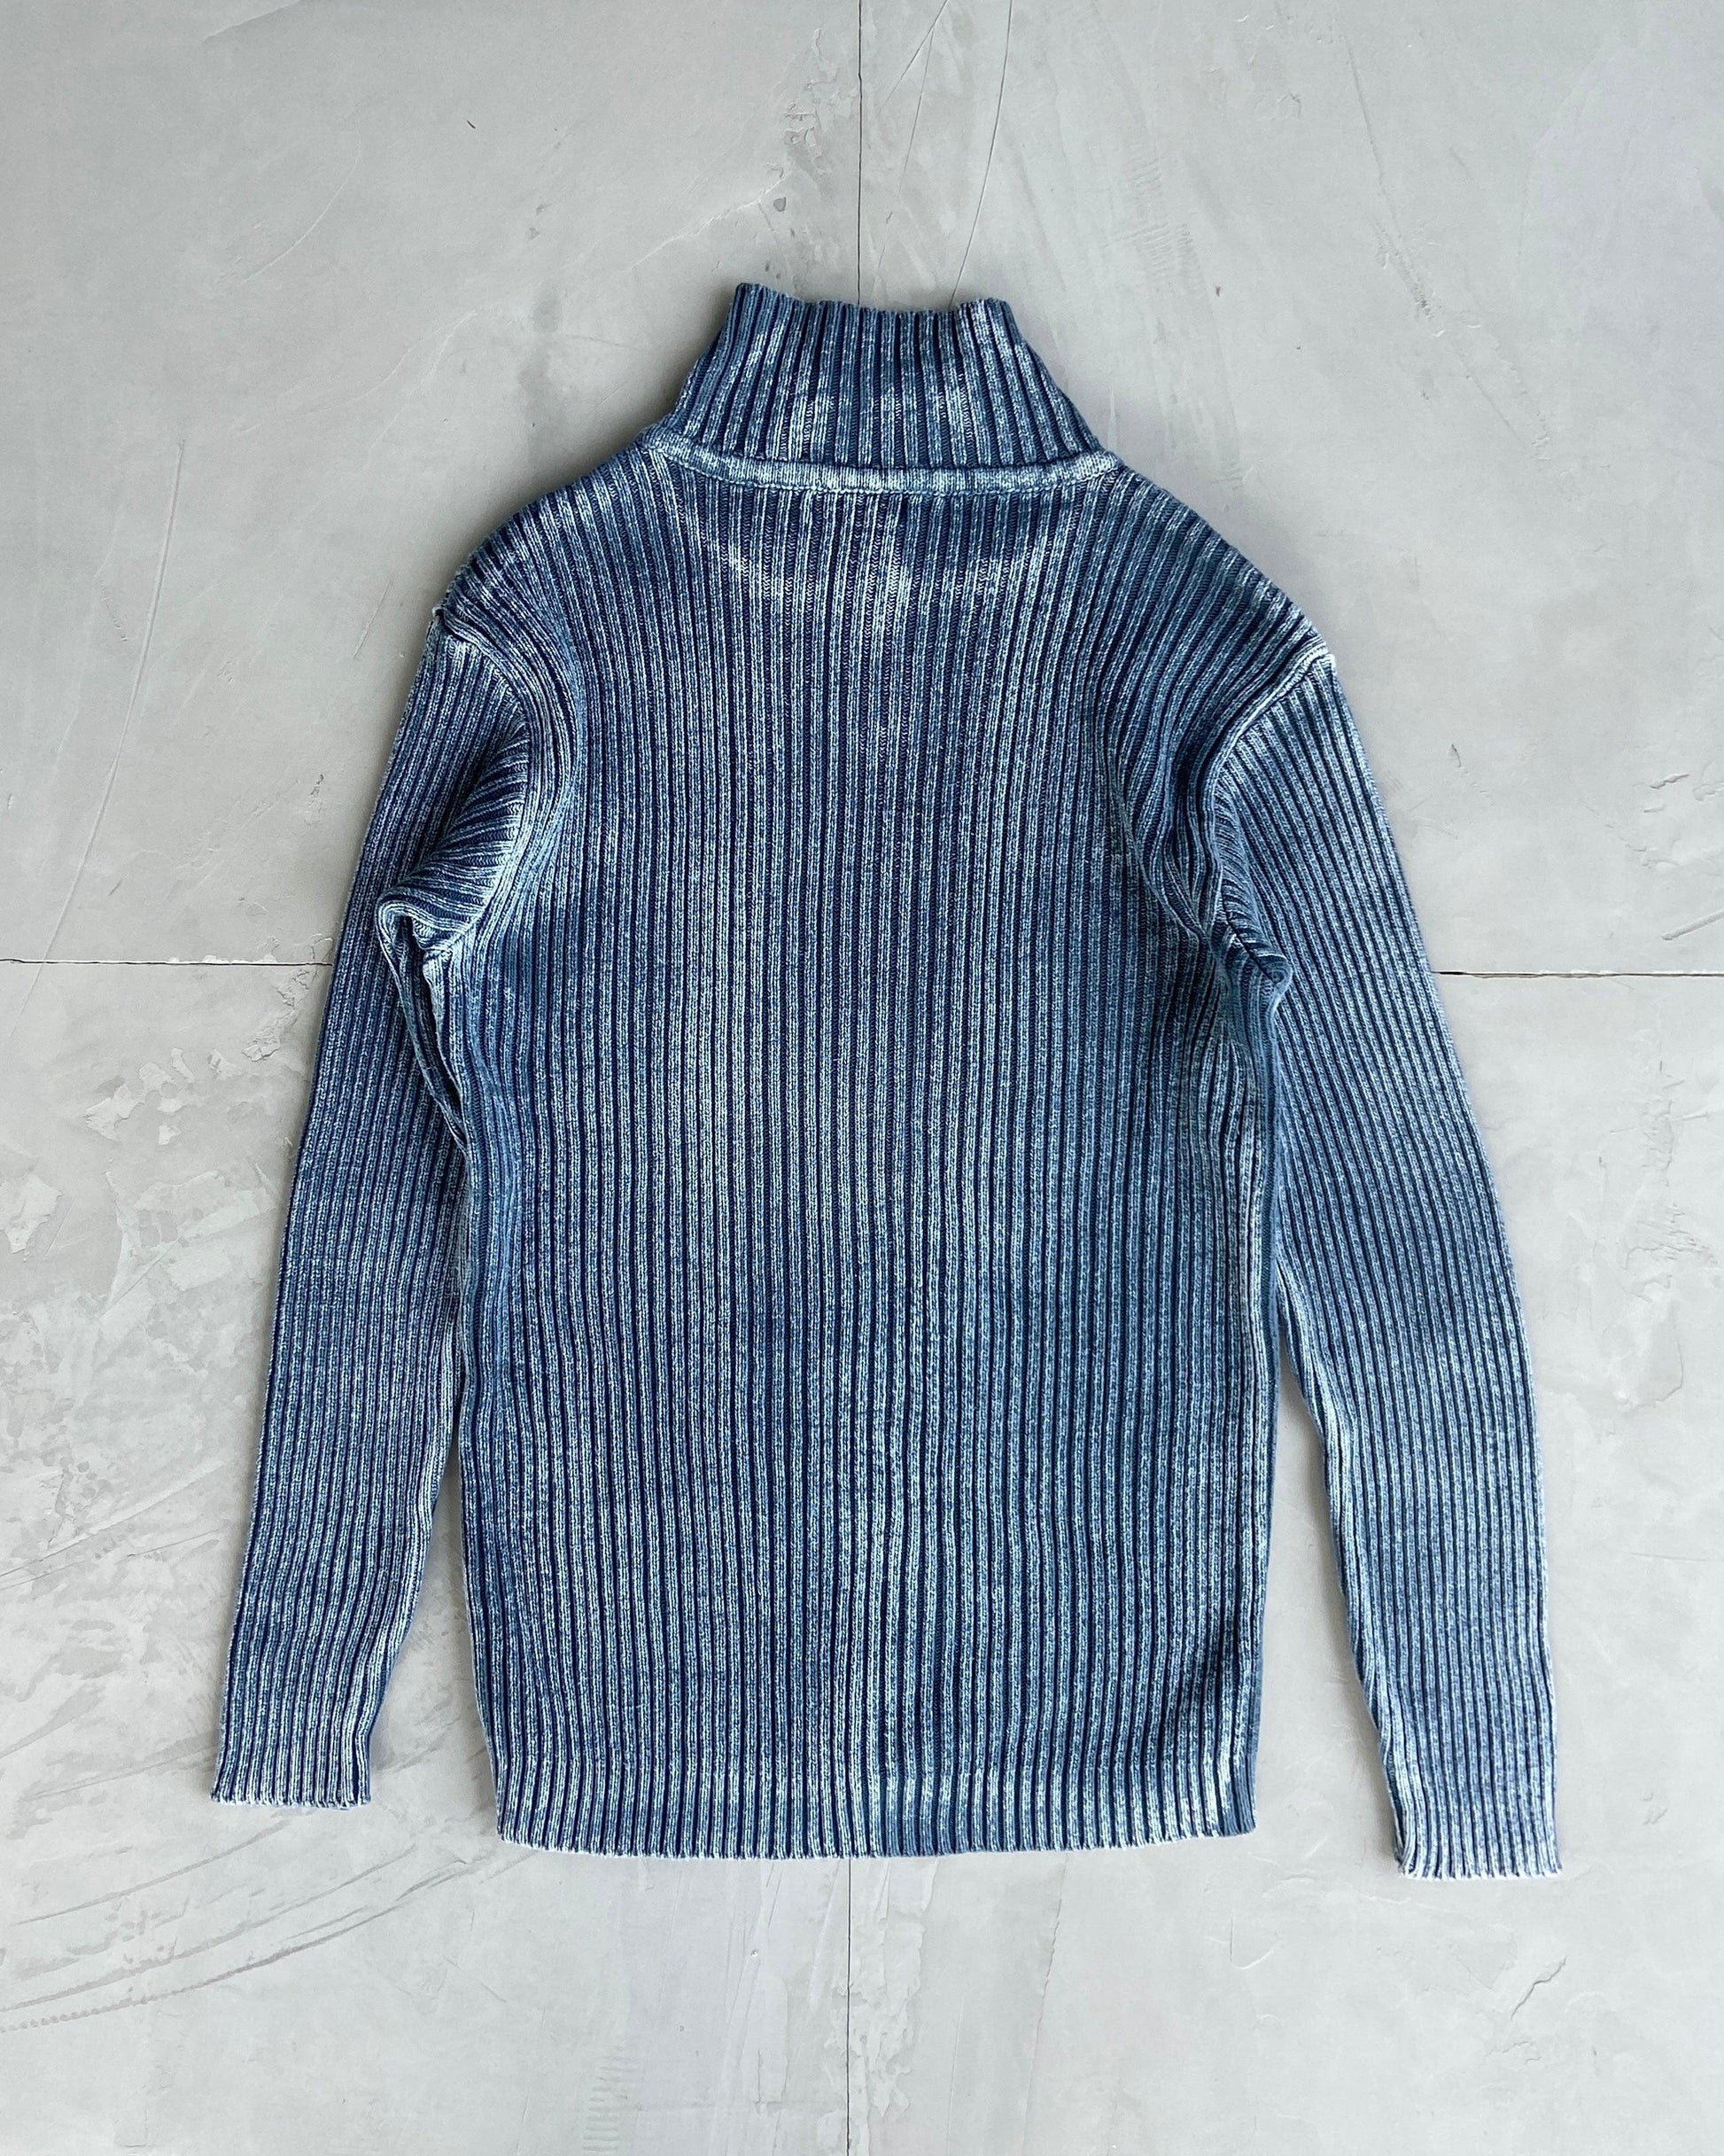 DIESEL 90'S WASHED RIBBED KNIT SWEATSHIRT - L - Known Source